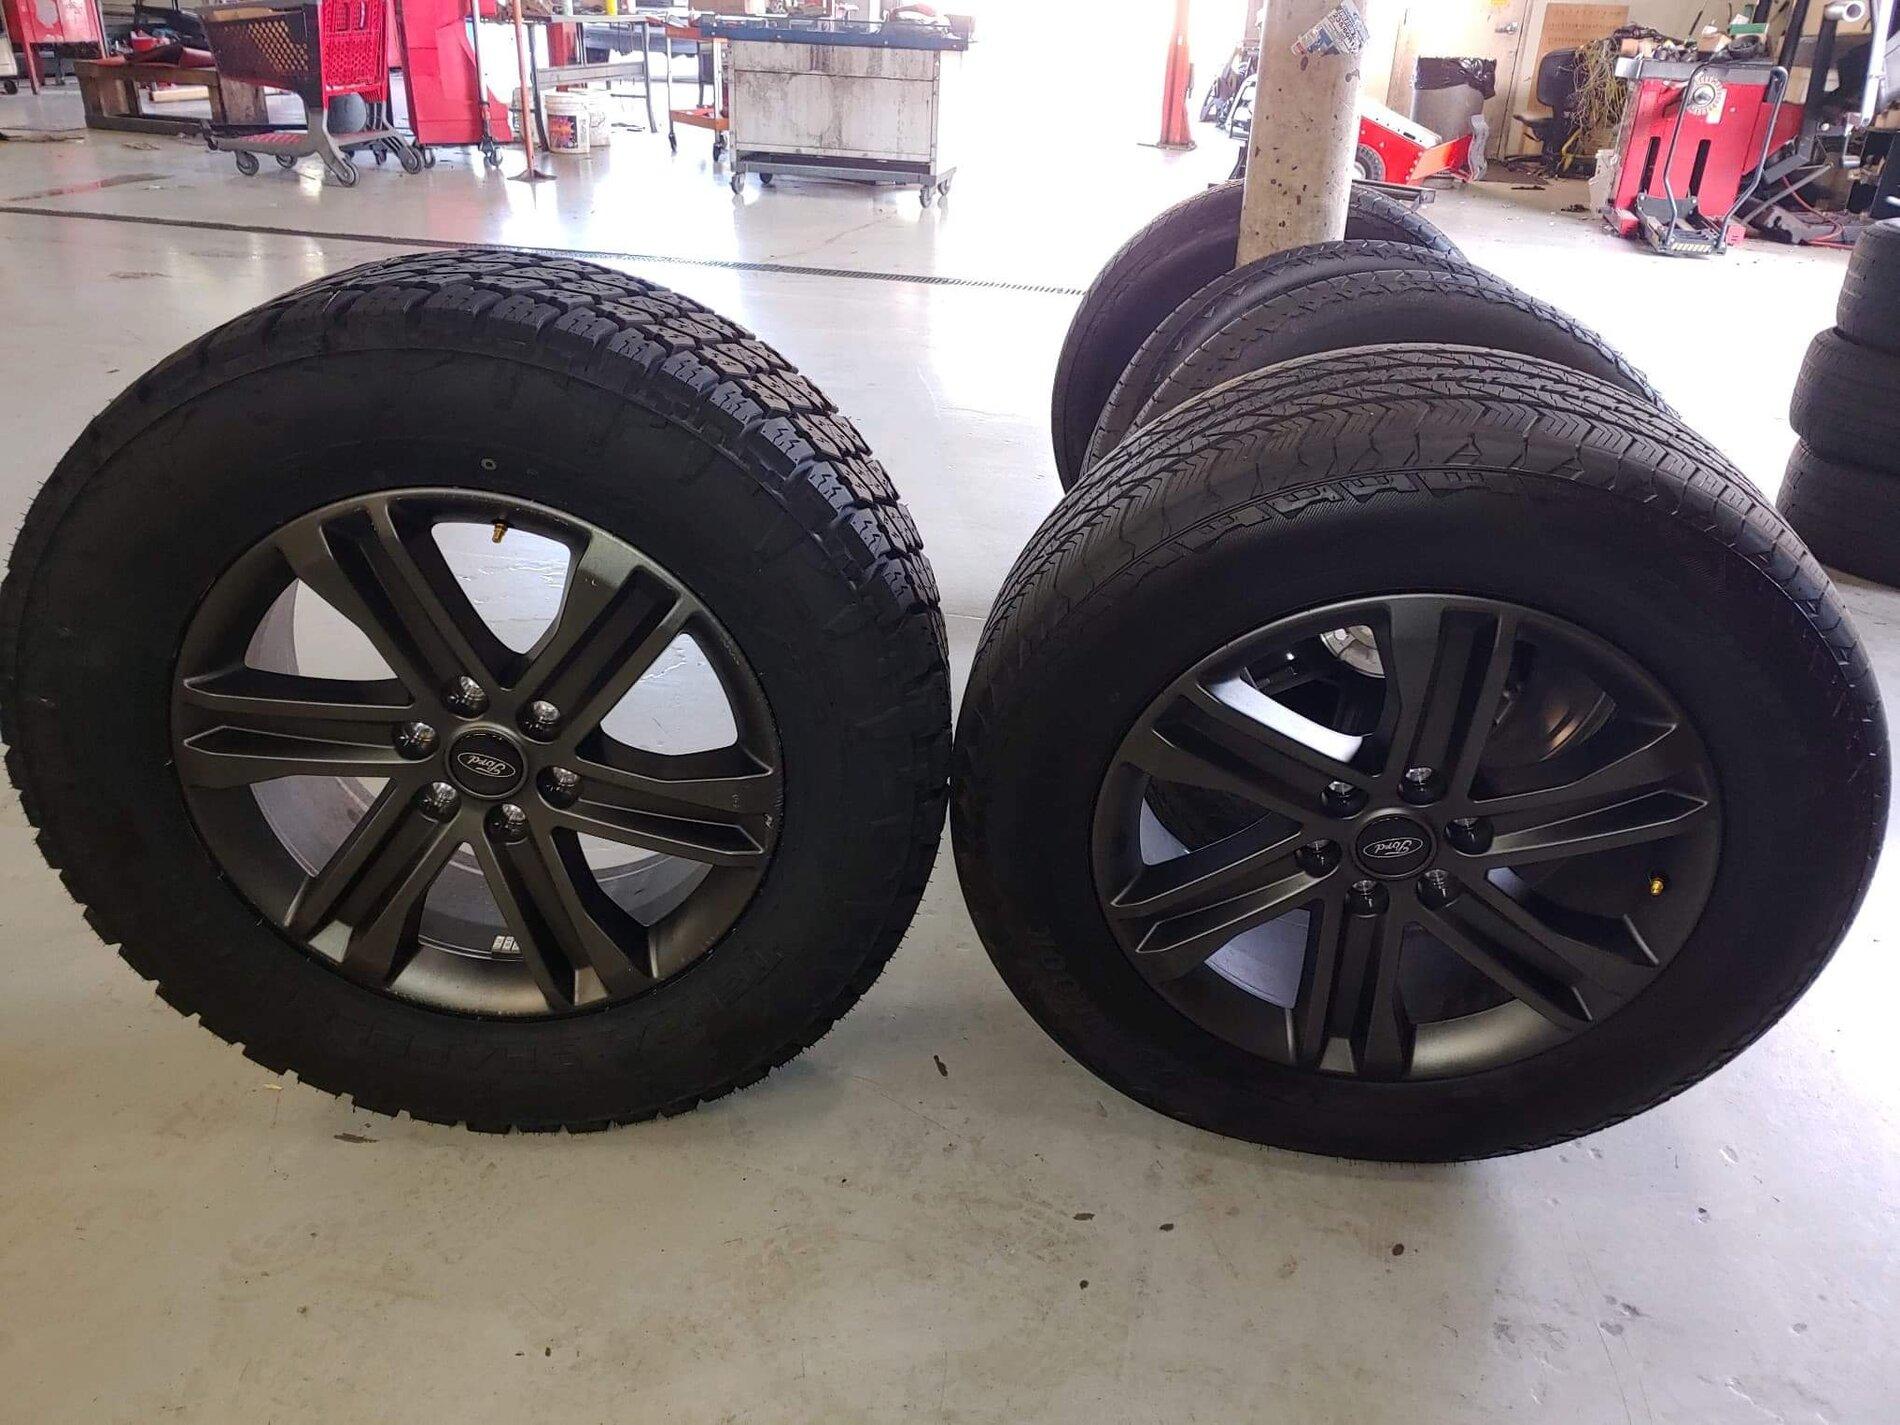 Ford F-150 Lightning 275/65/20 Nitto Ridge Grappler VS 295/60/20 Terra Grappler side by side visual comparison. received_450550266198378